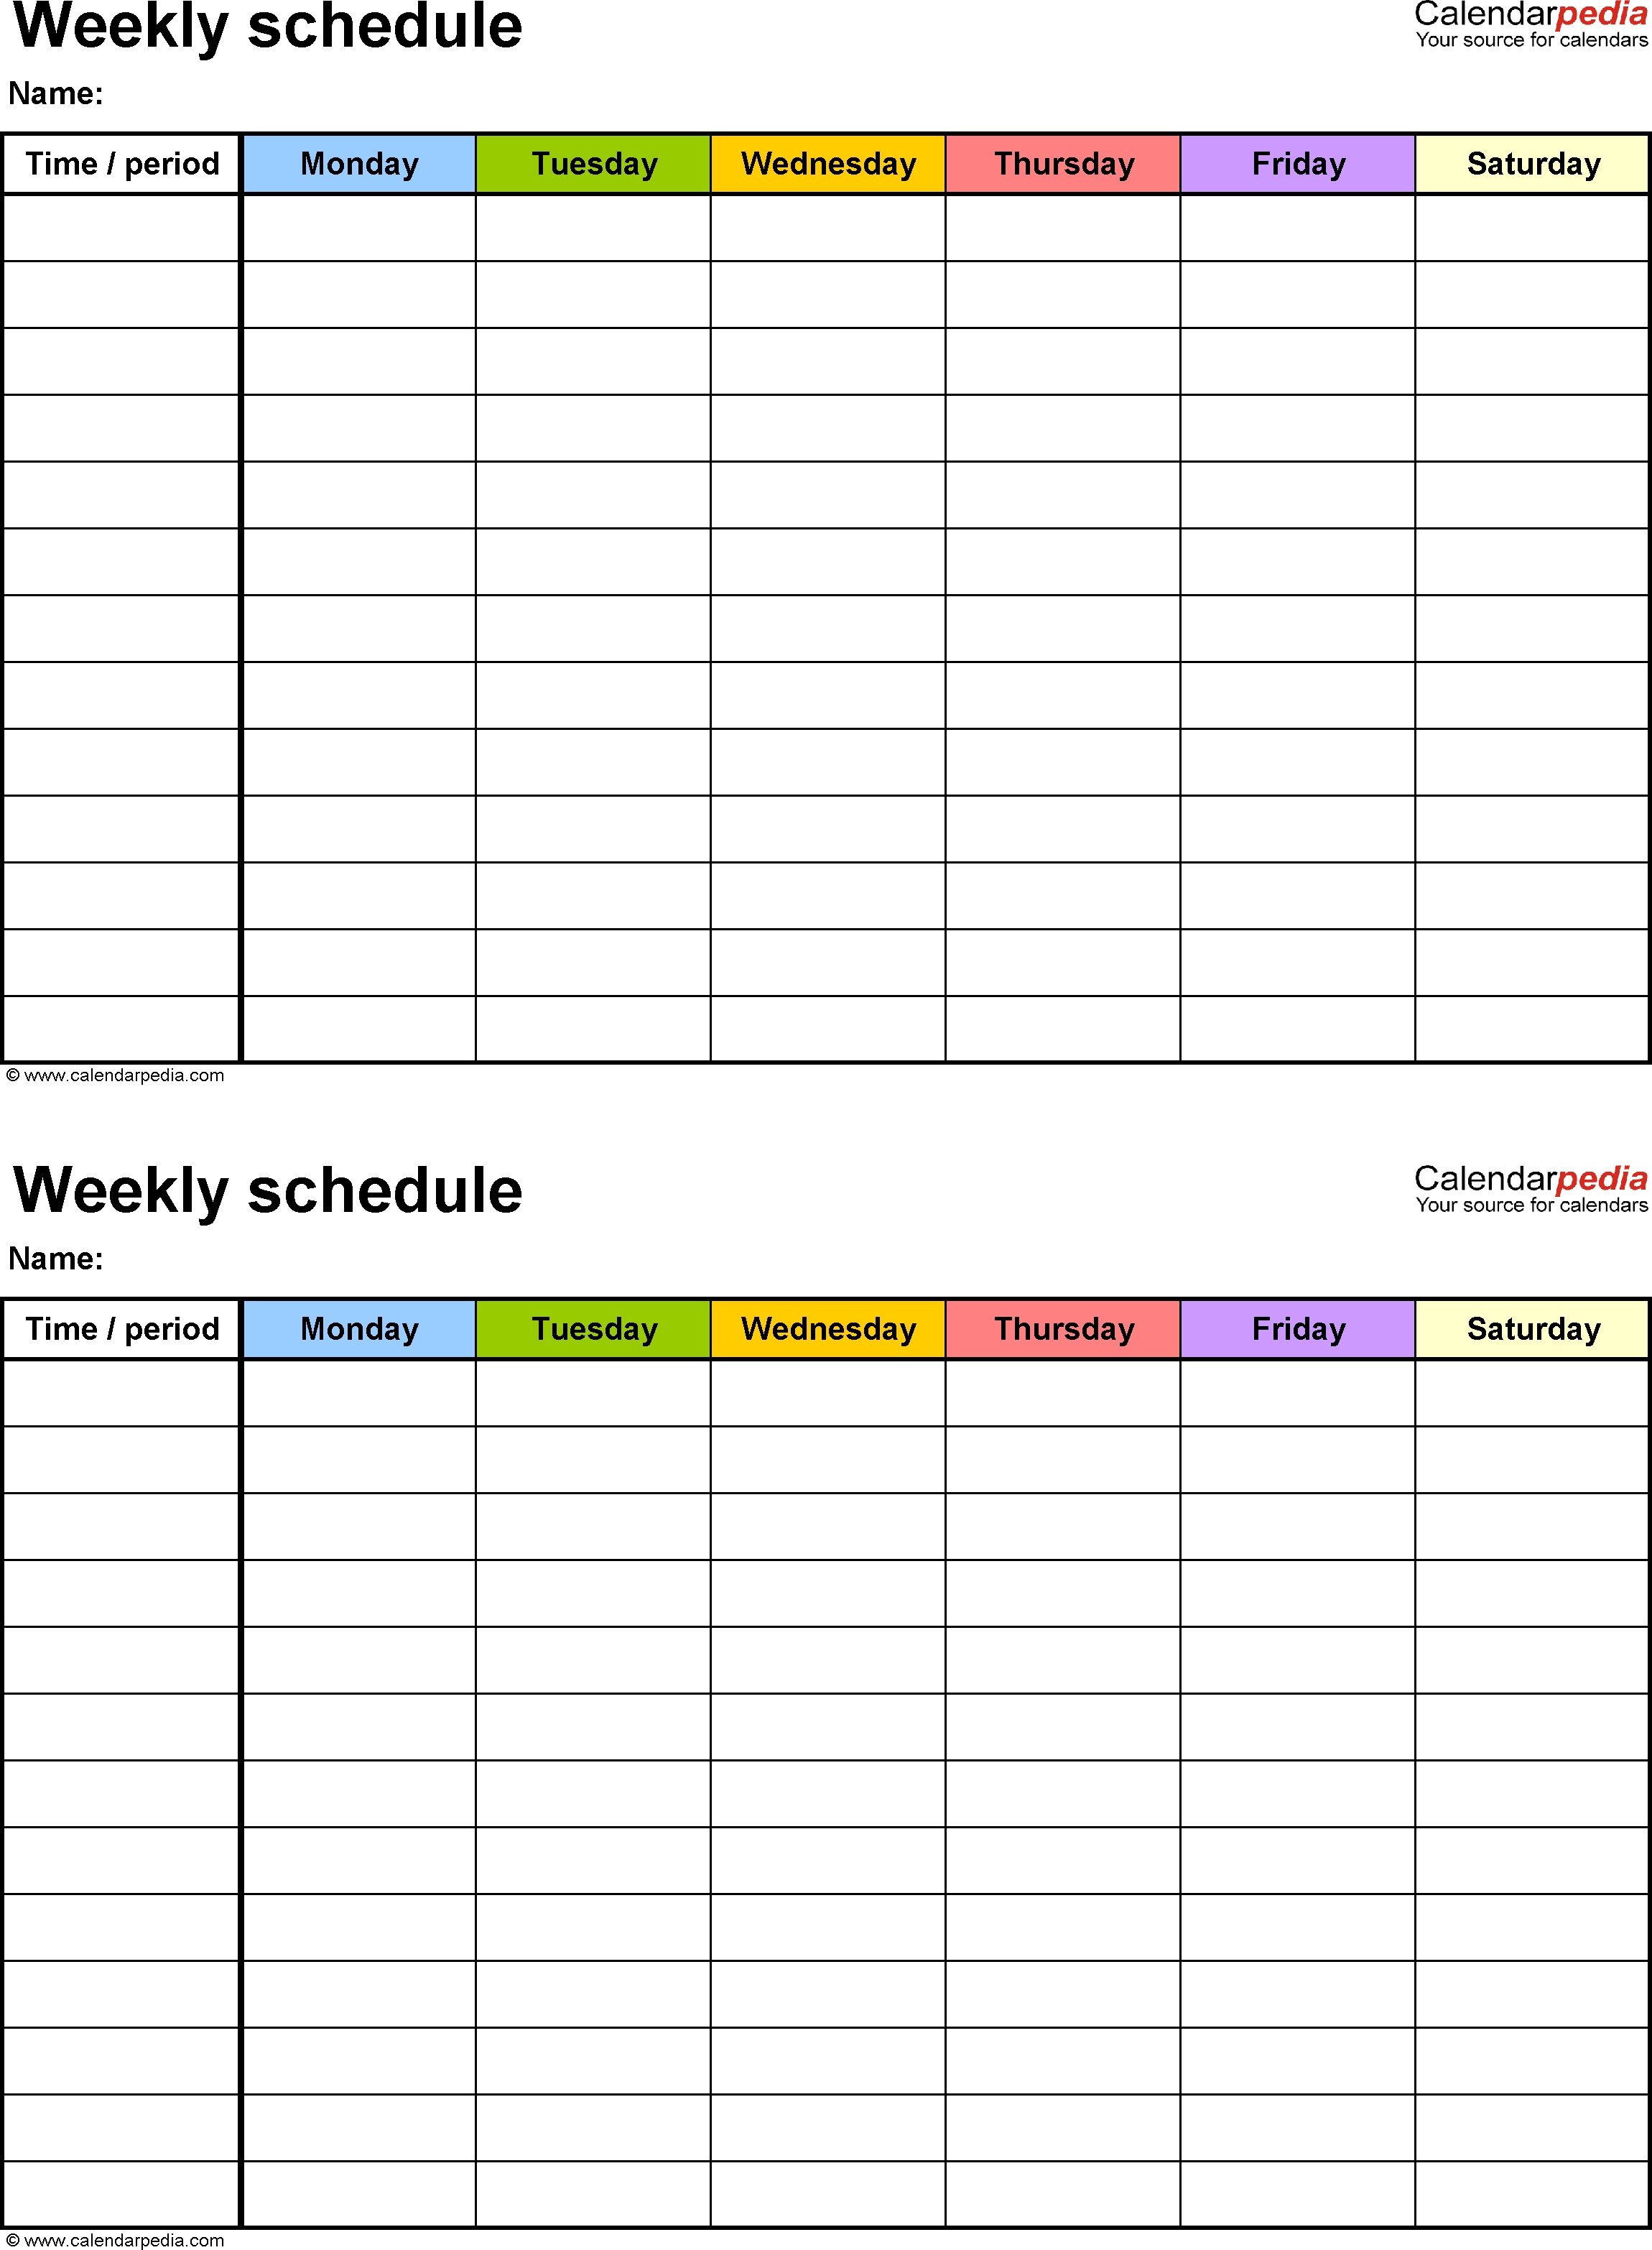 Free Weekly Schedule Templates For Excel - 18 Templates with Emplyee Schedule Template Starting Friday